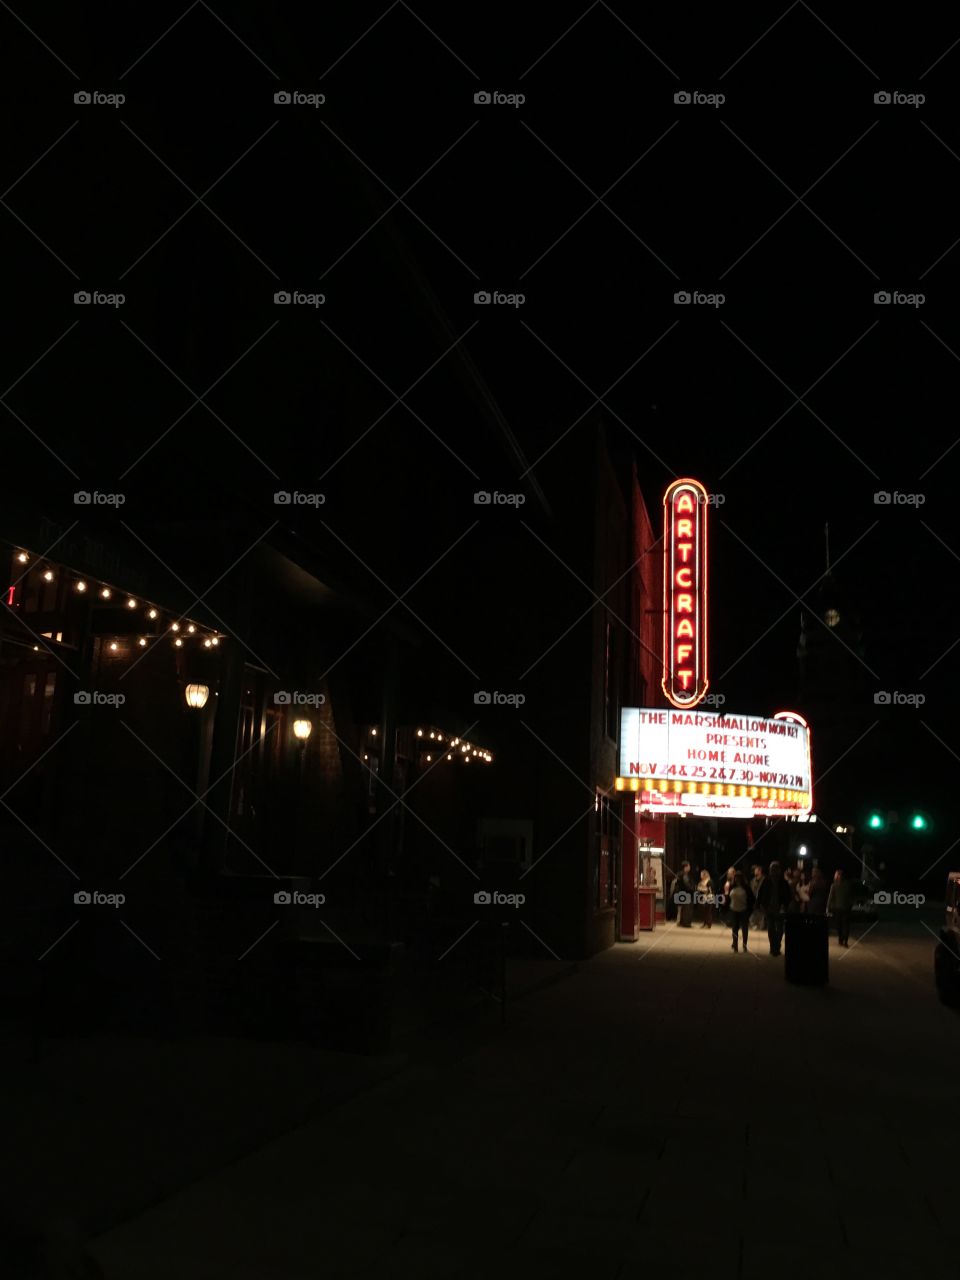 The original Home Alone showing at the historic Artcraft theatre, just in time for Christmas. 